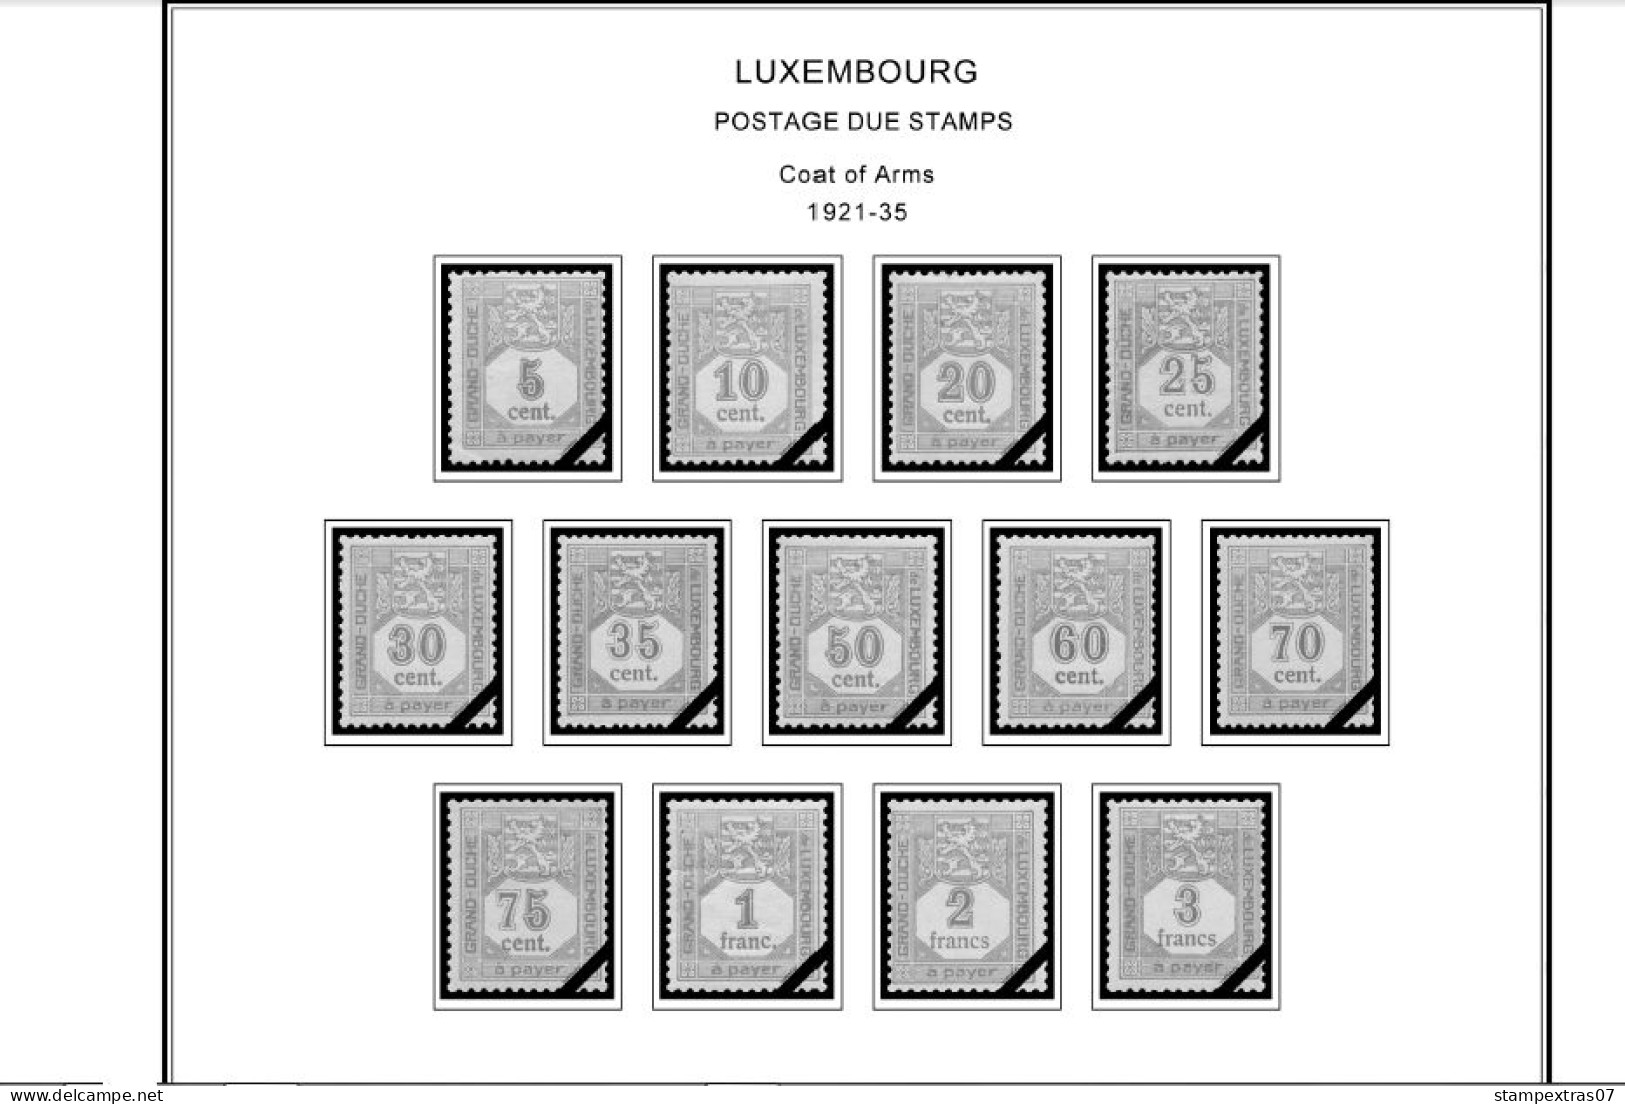 LUXEMBOURG 1852-2010 + 2011-2020 STAMP ALBUM PAGES (244 b&w illustrated pages)